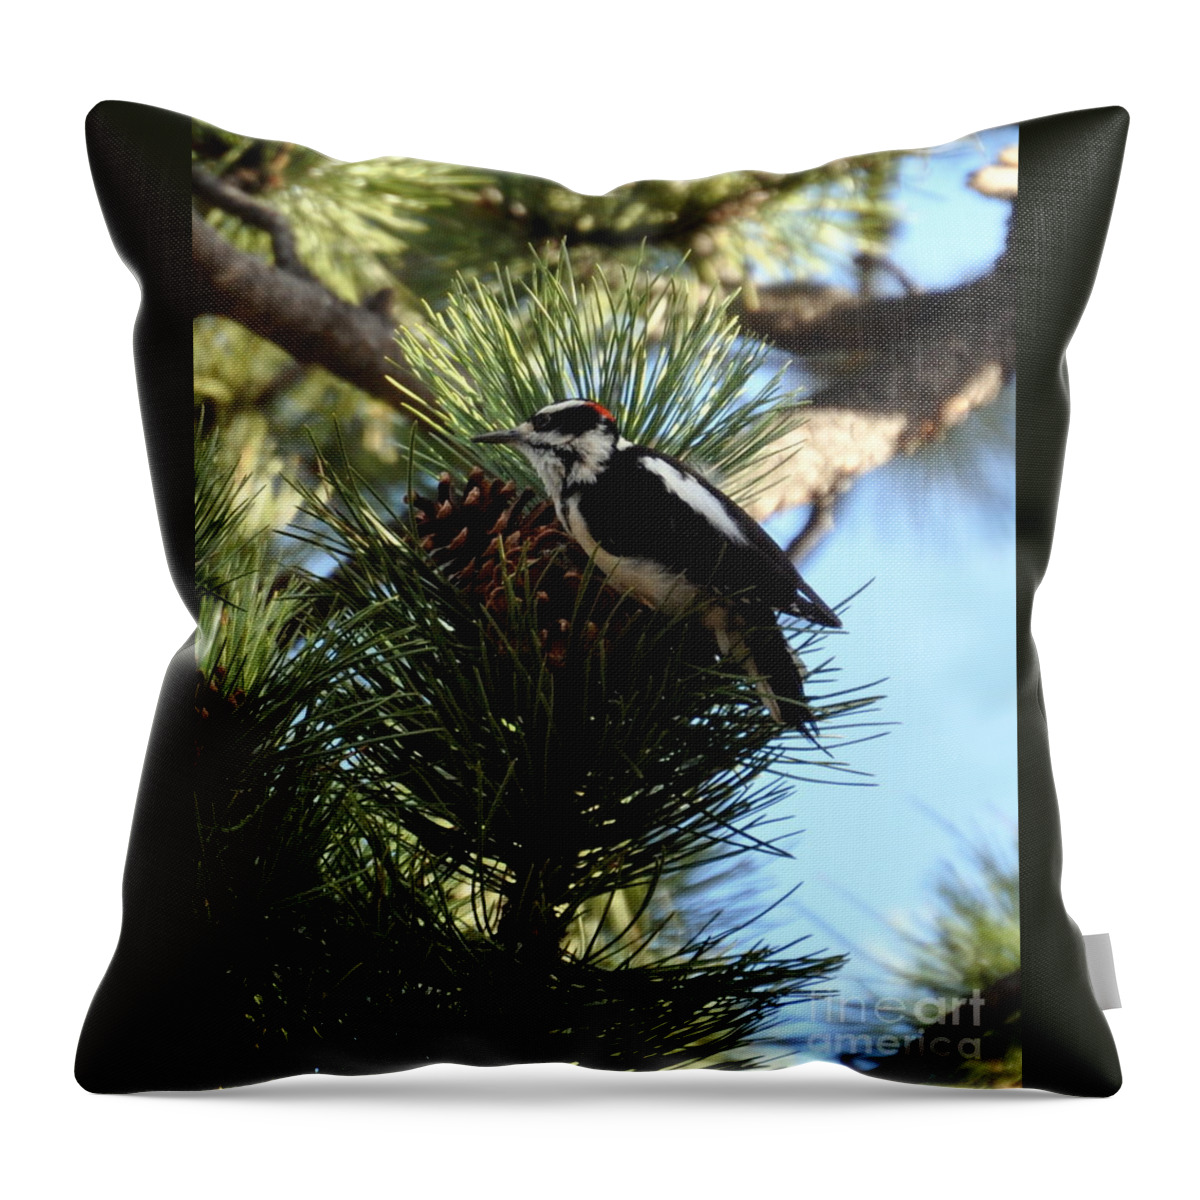 Woodpecker Throw Pillow featuring the photograph Hairy Woodpecker on Pine Cone by Dorrene BrownButterfield